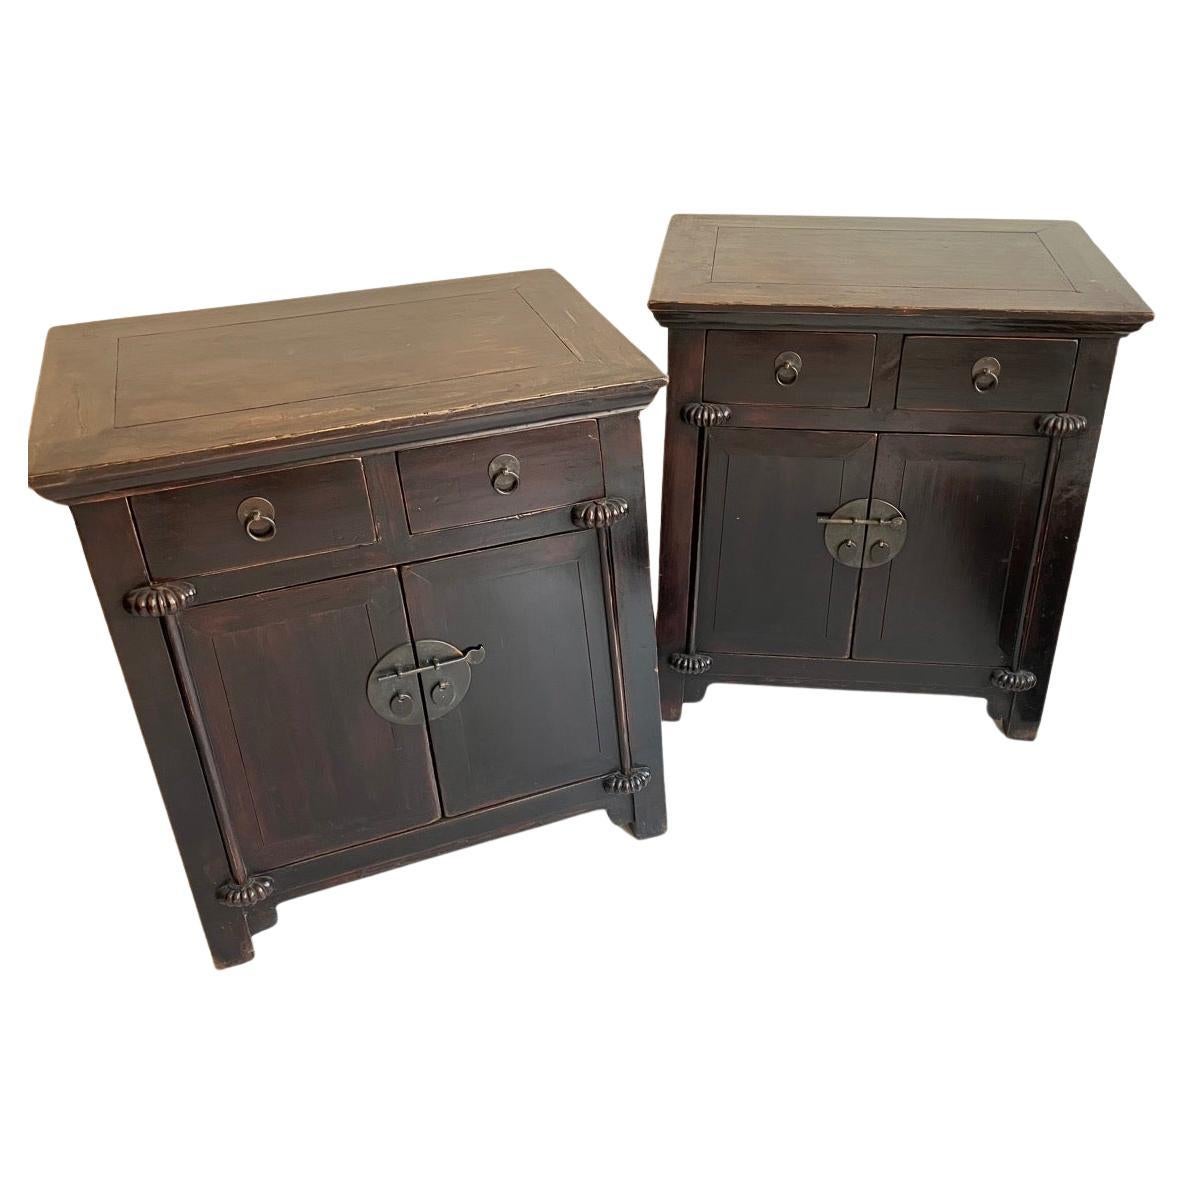 Pair of early 20th century Chinese hardwood side cabinets